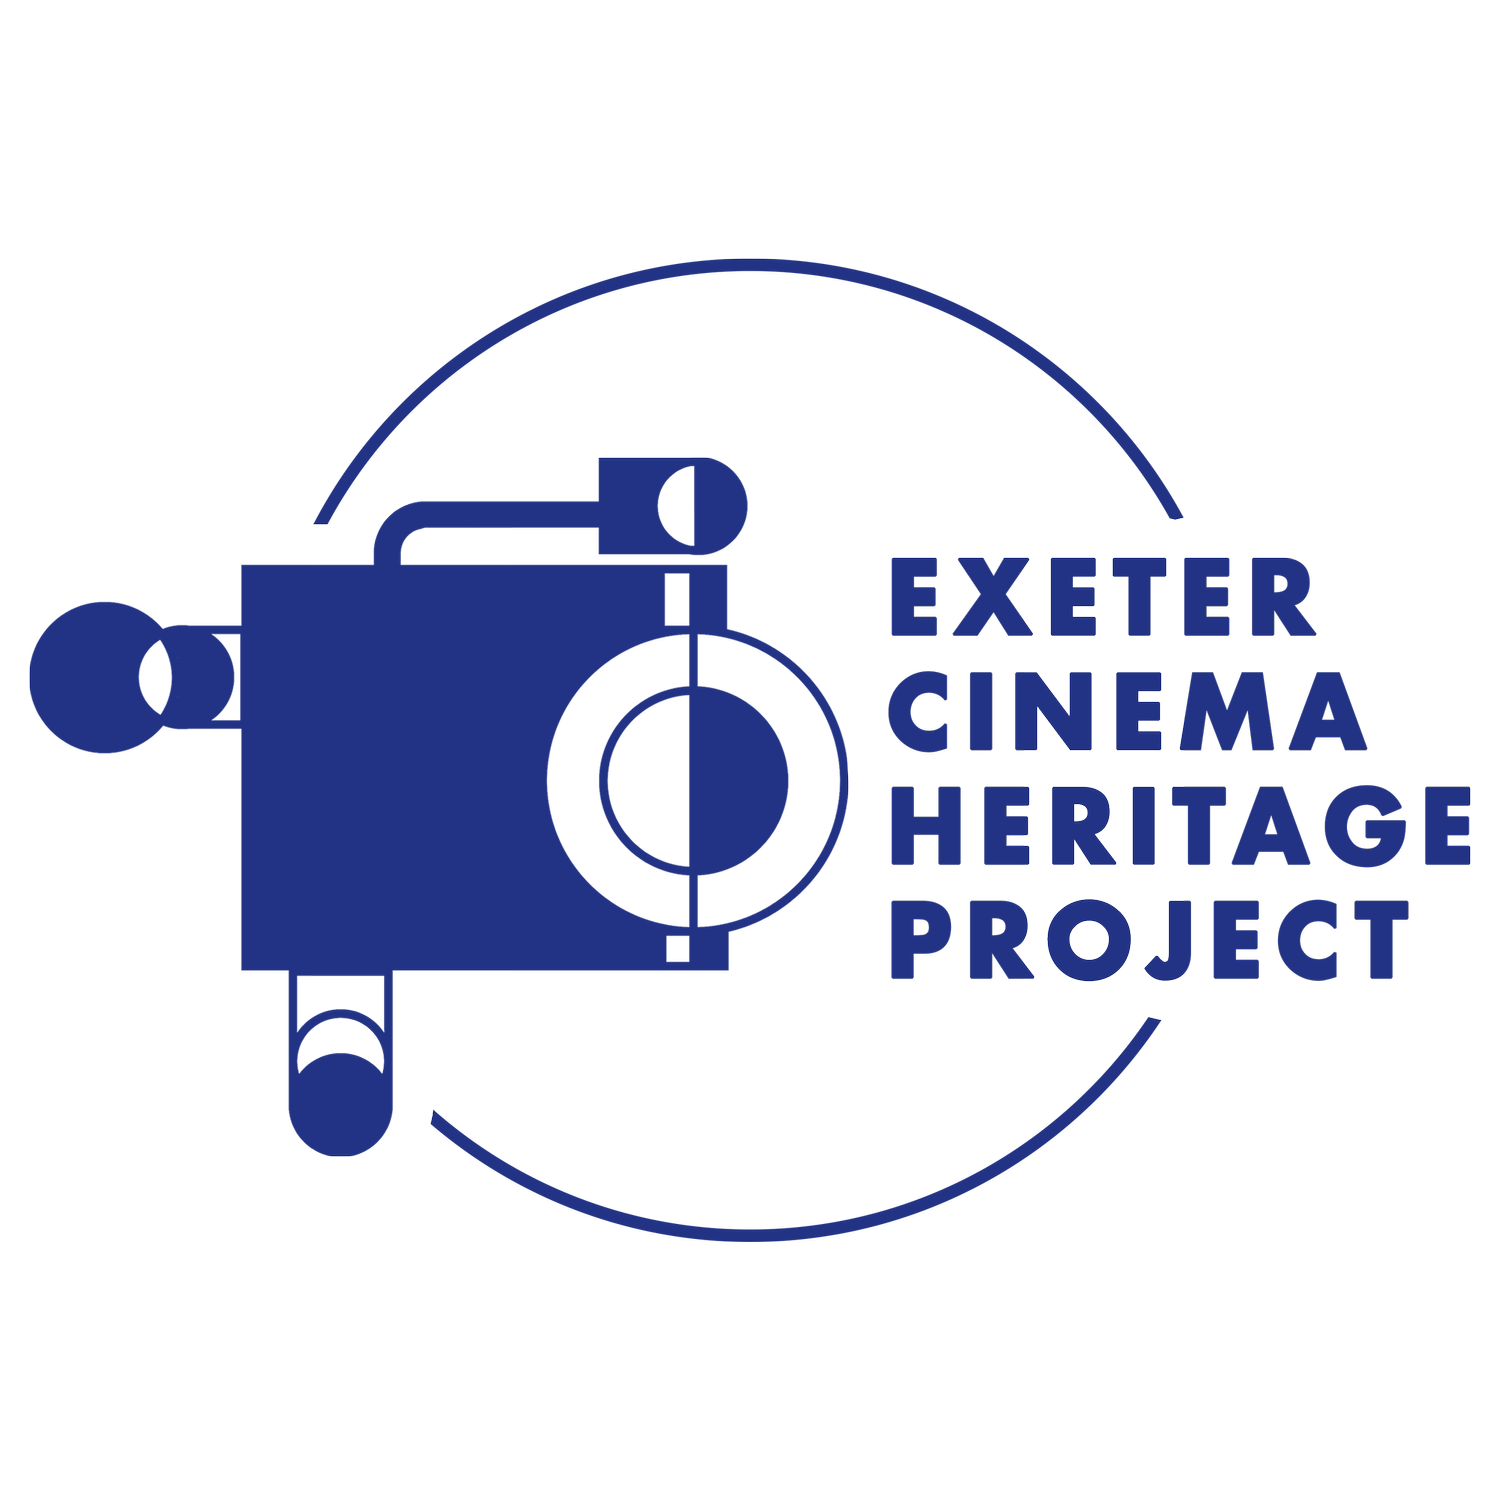 The Exeter Cinema Heritage Project (2022) documented and recorded the stories of Exeter residents and their earliest memories of cinema going in the city.